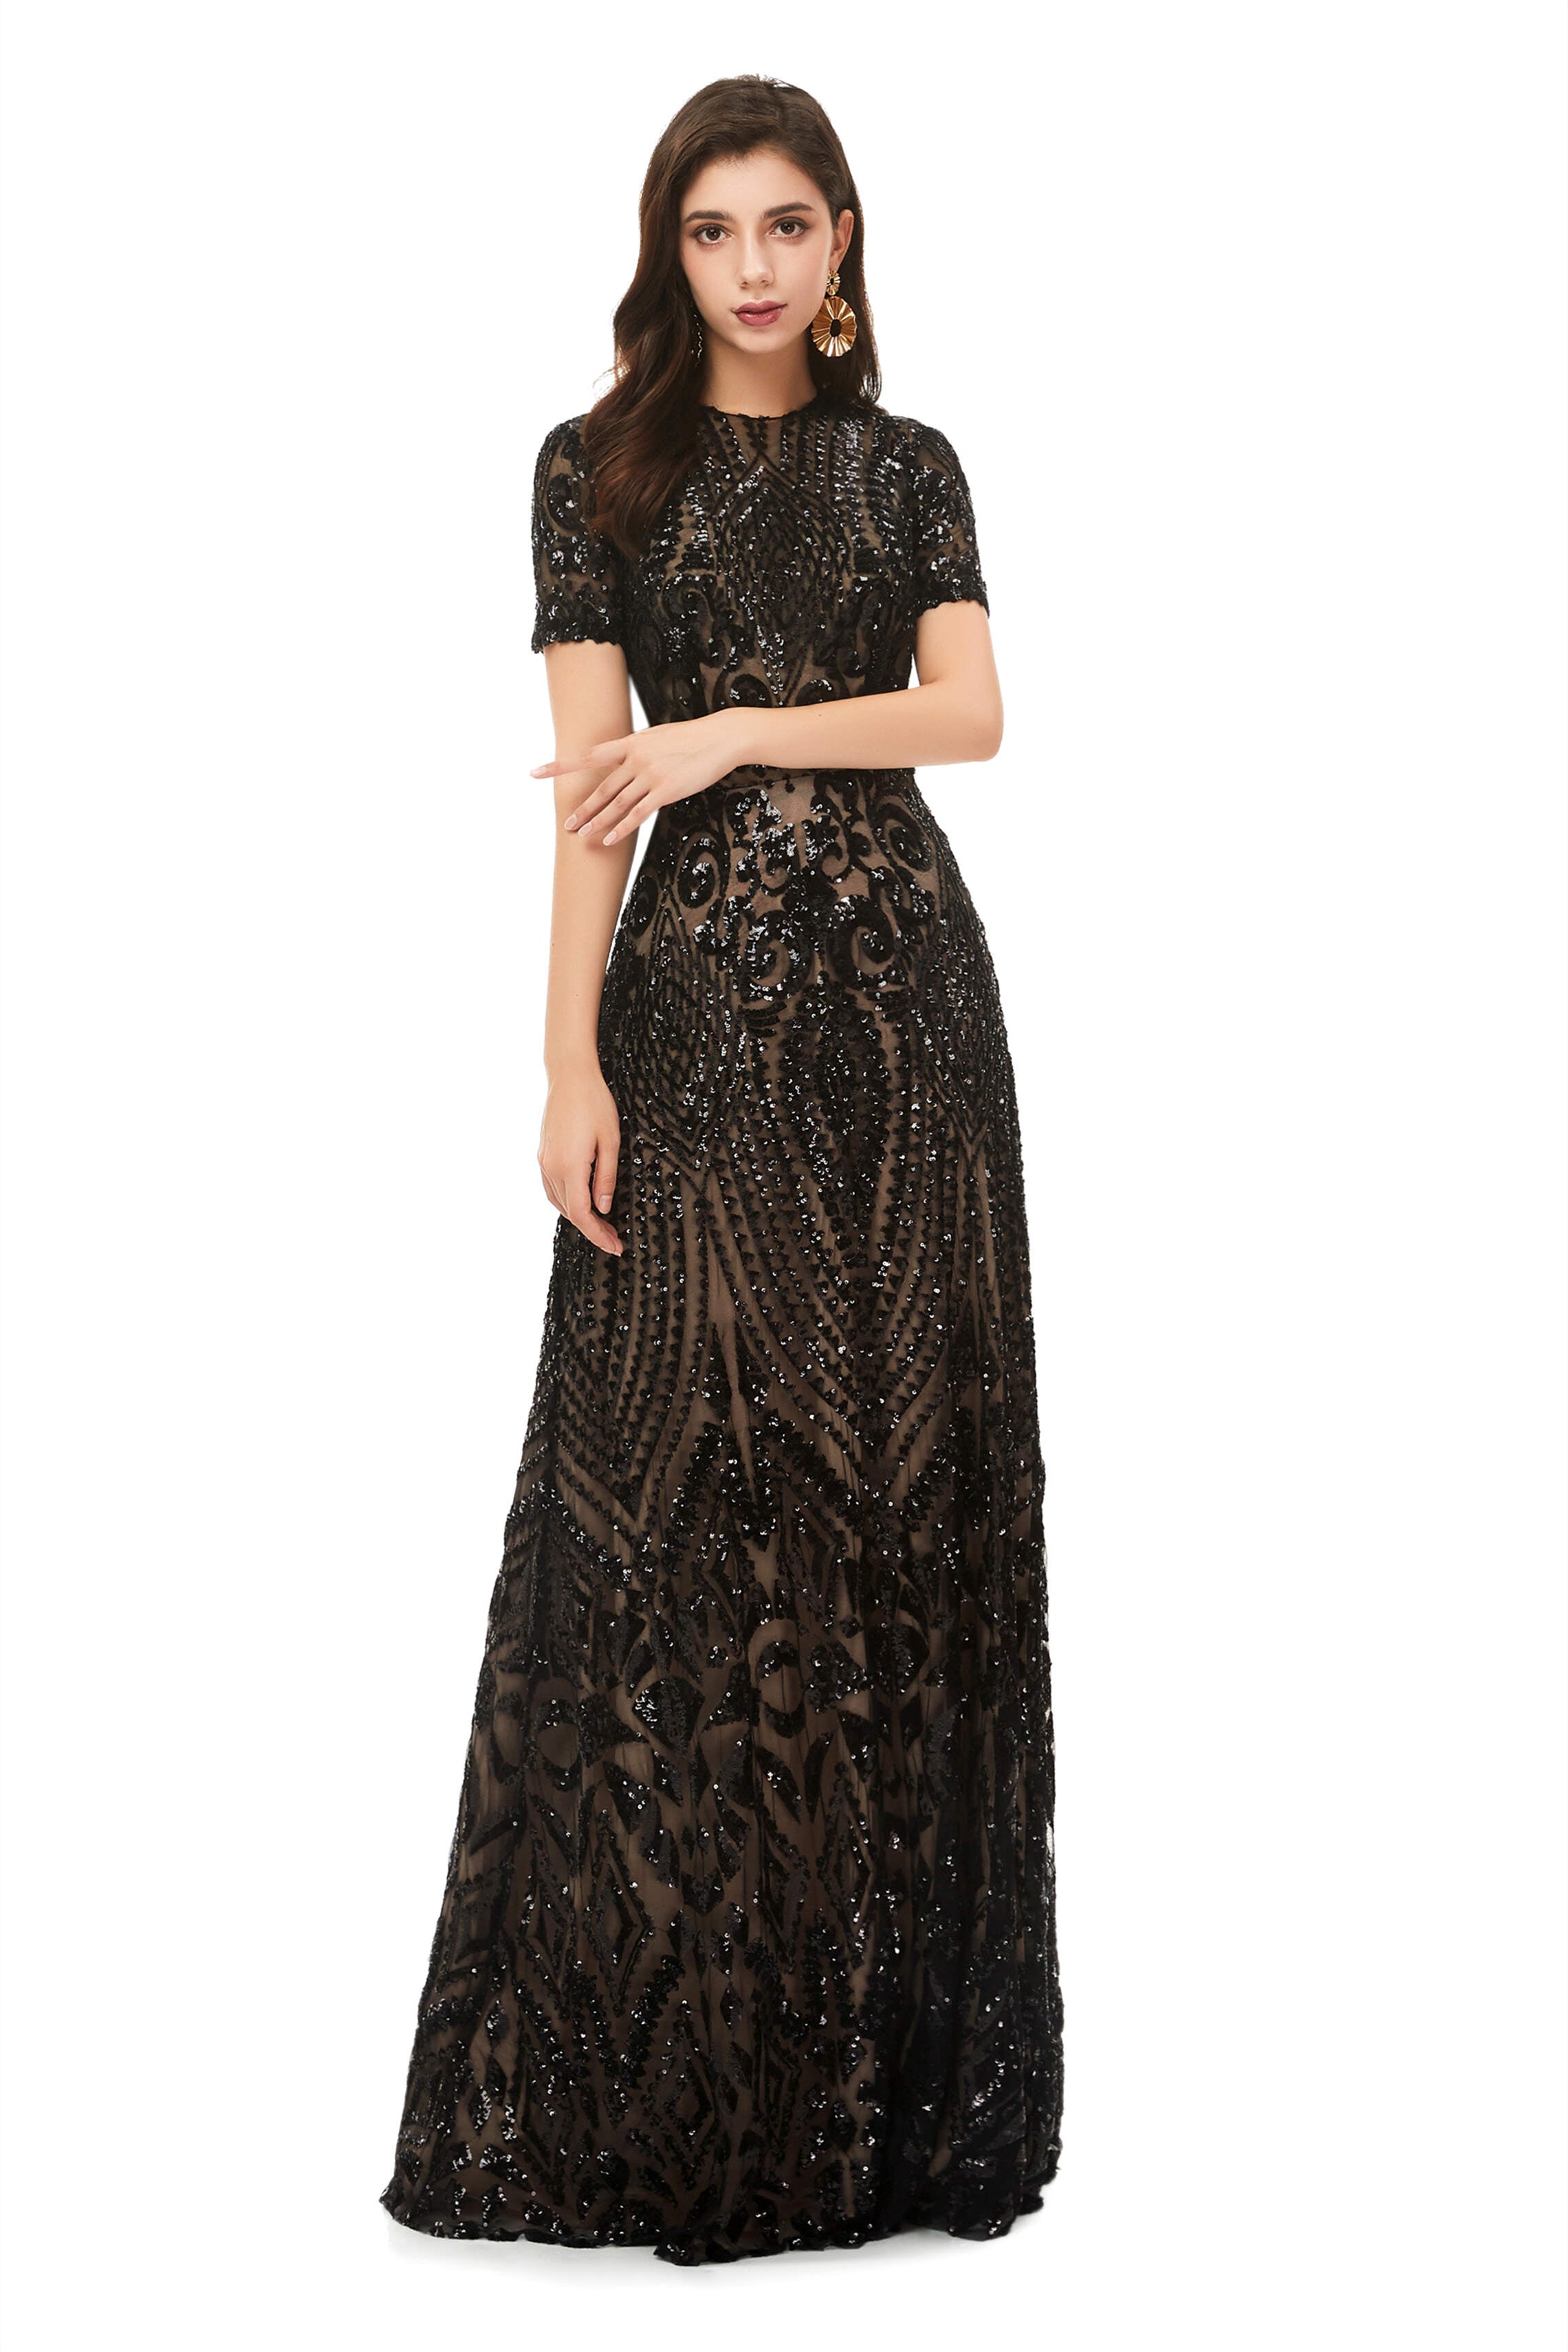 Long Black Sparkly Sequins Corset Prom Dresses With Short Sleeves Gowns, Prom Dress Pattern